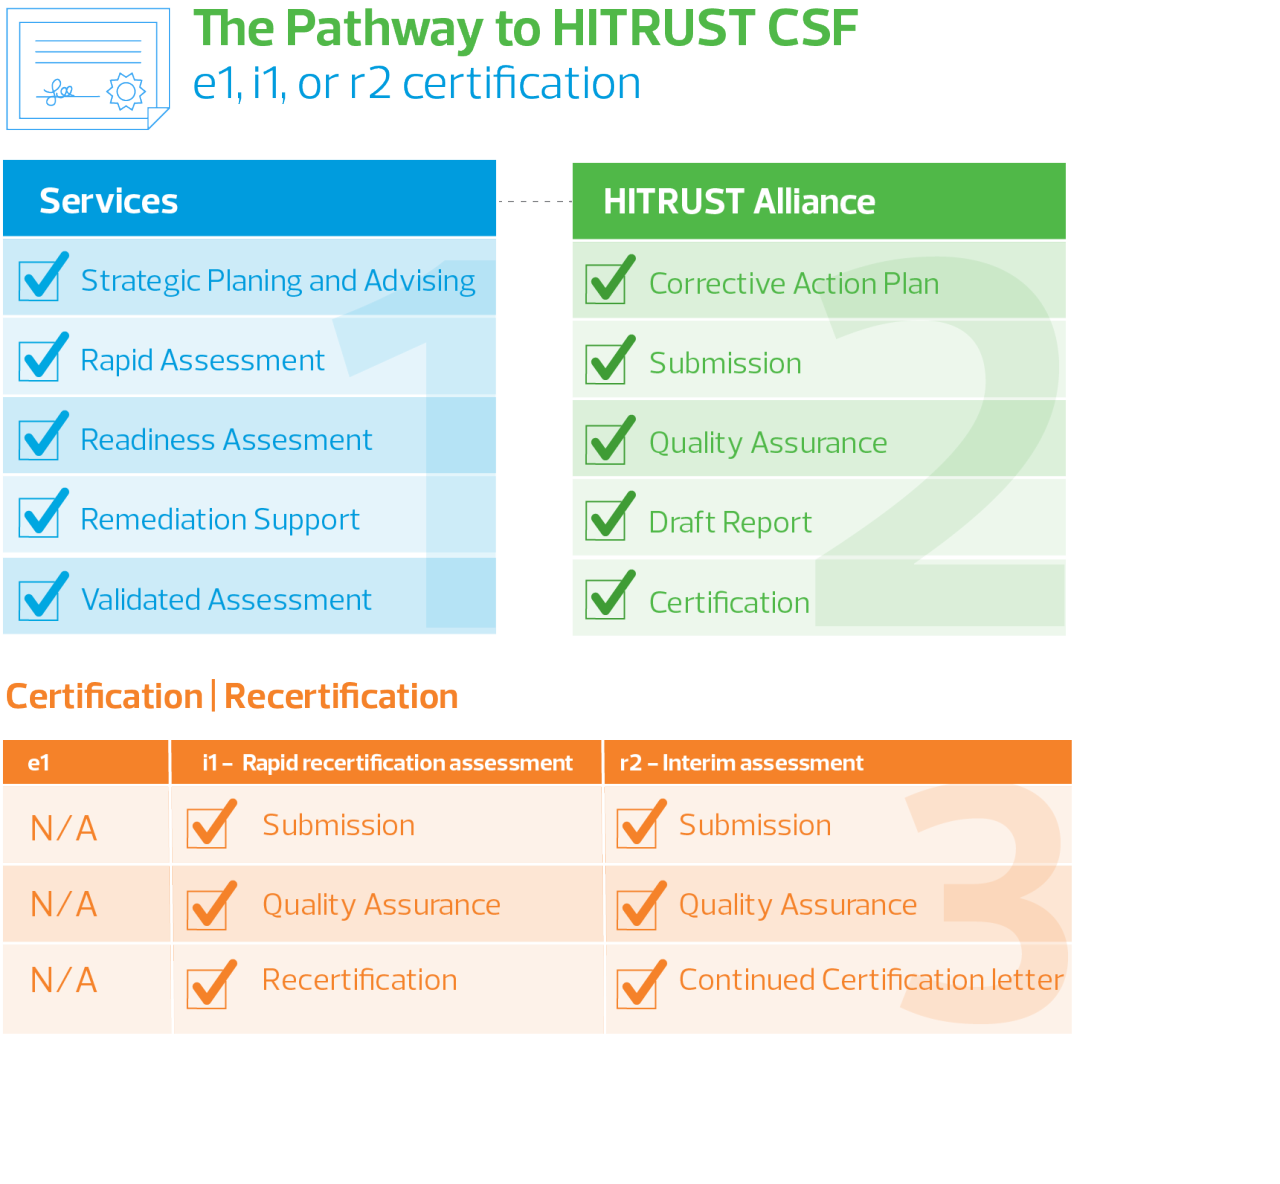 The pathway to HITRUST CSF: e1, i1, or r2 certification